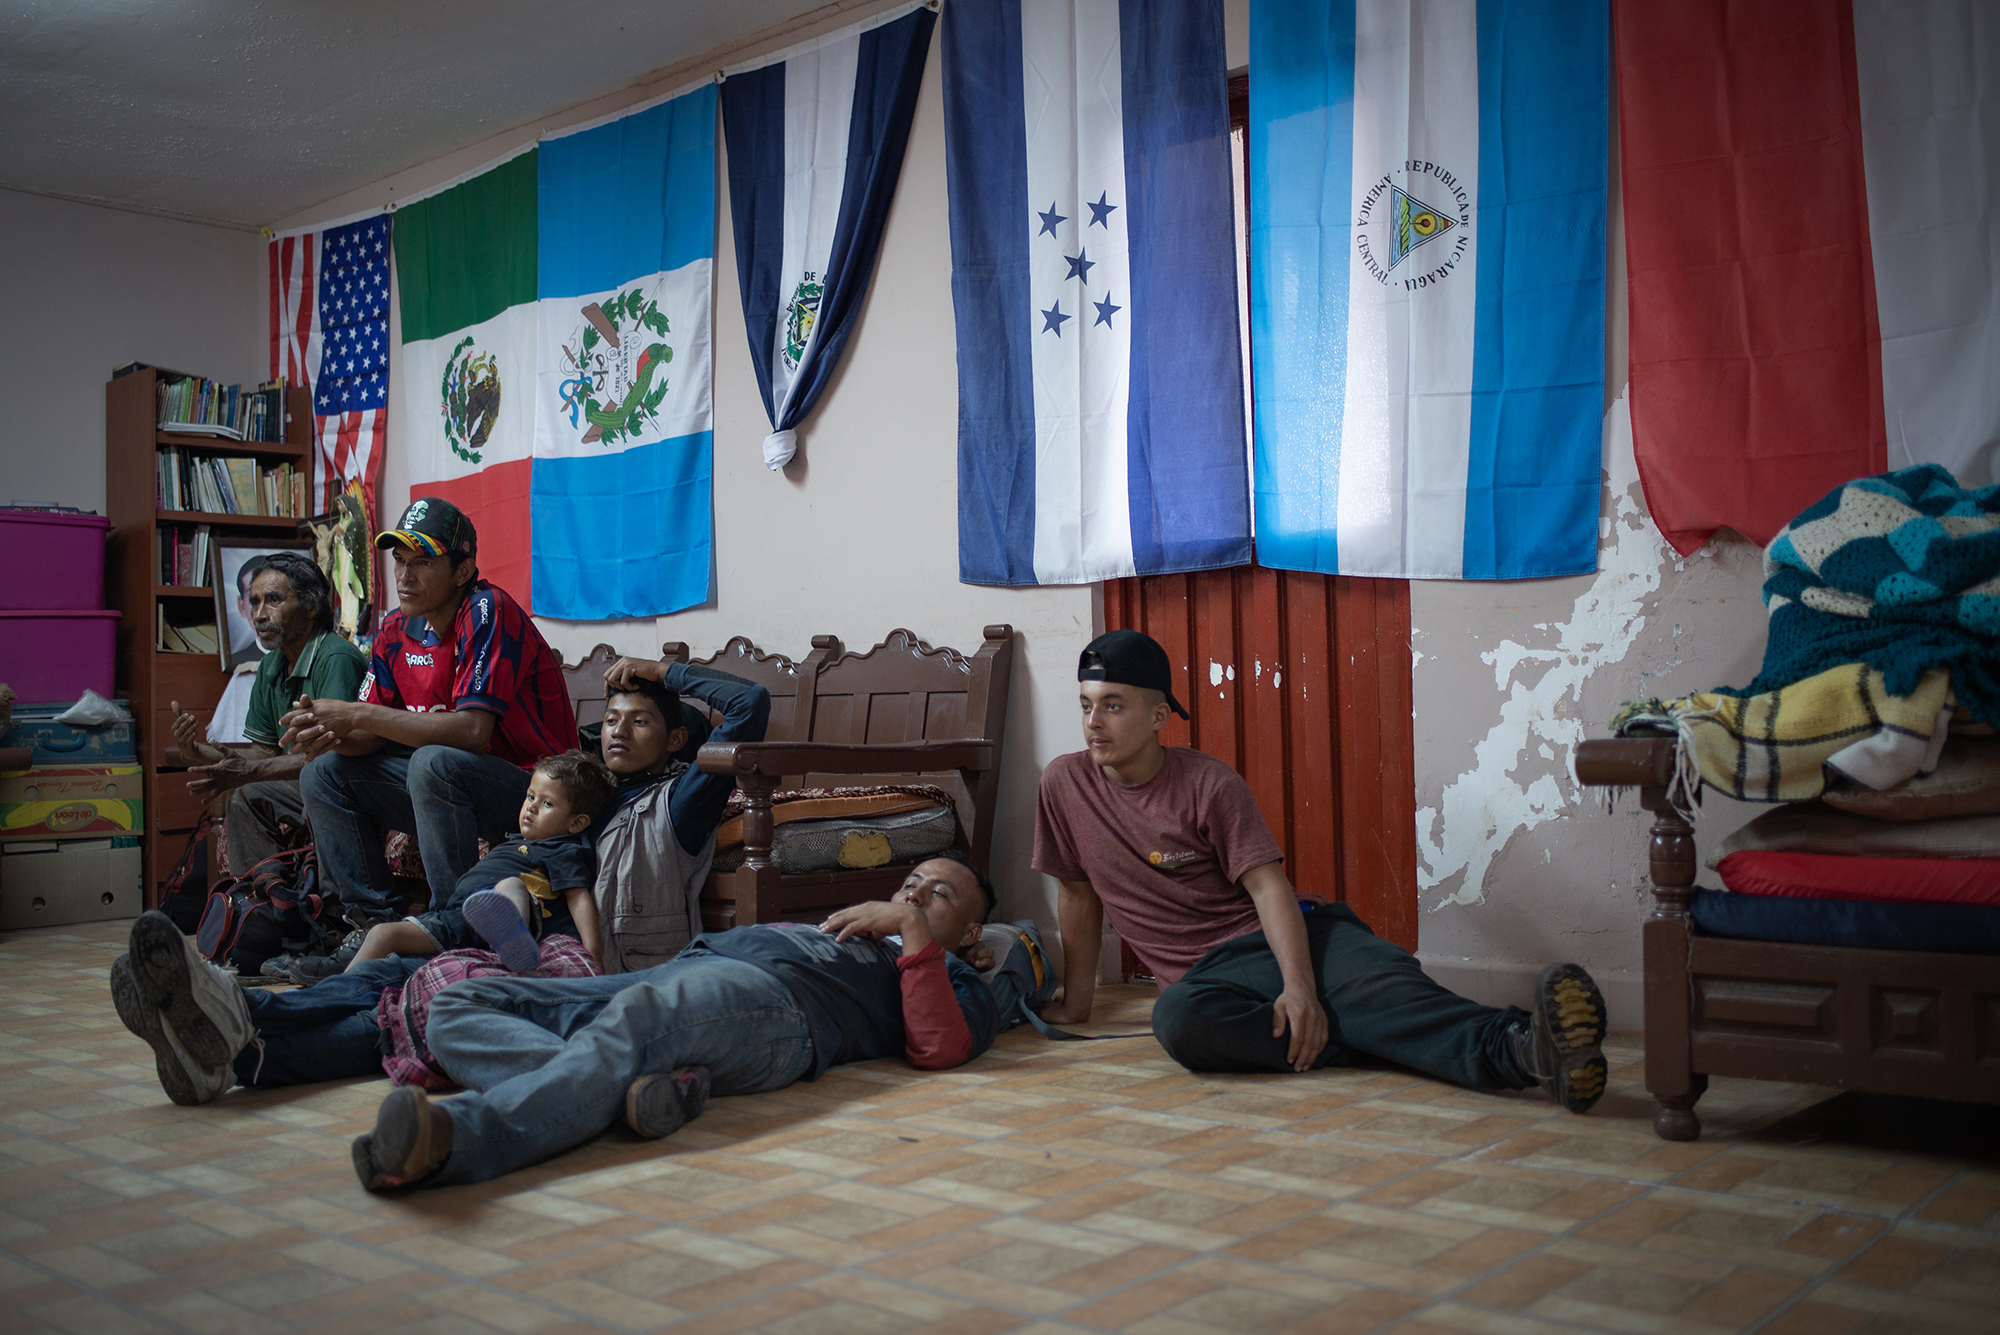  A group of migrants hangs out and watches TV at "Casa del Migrante Frontera Digna" created by priest Jose Guadalupe Valdes Alvarado. "Casa del Migrante Frontera Digna" was created to provide lodging for migrants from different countries who arrive a